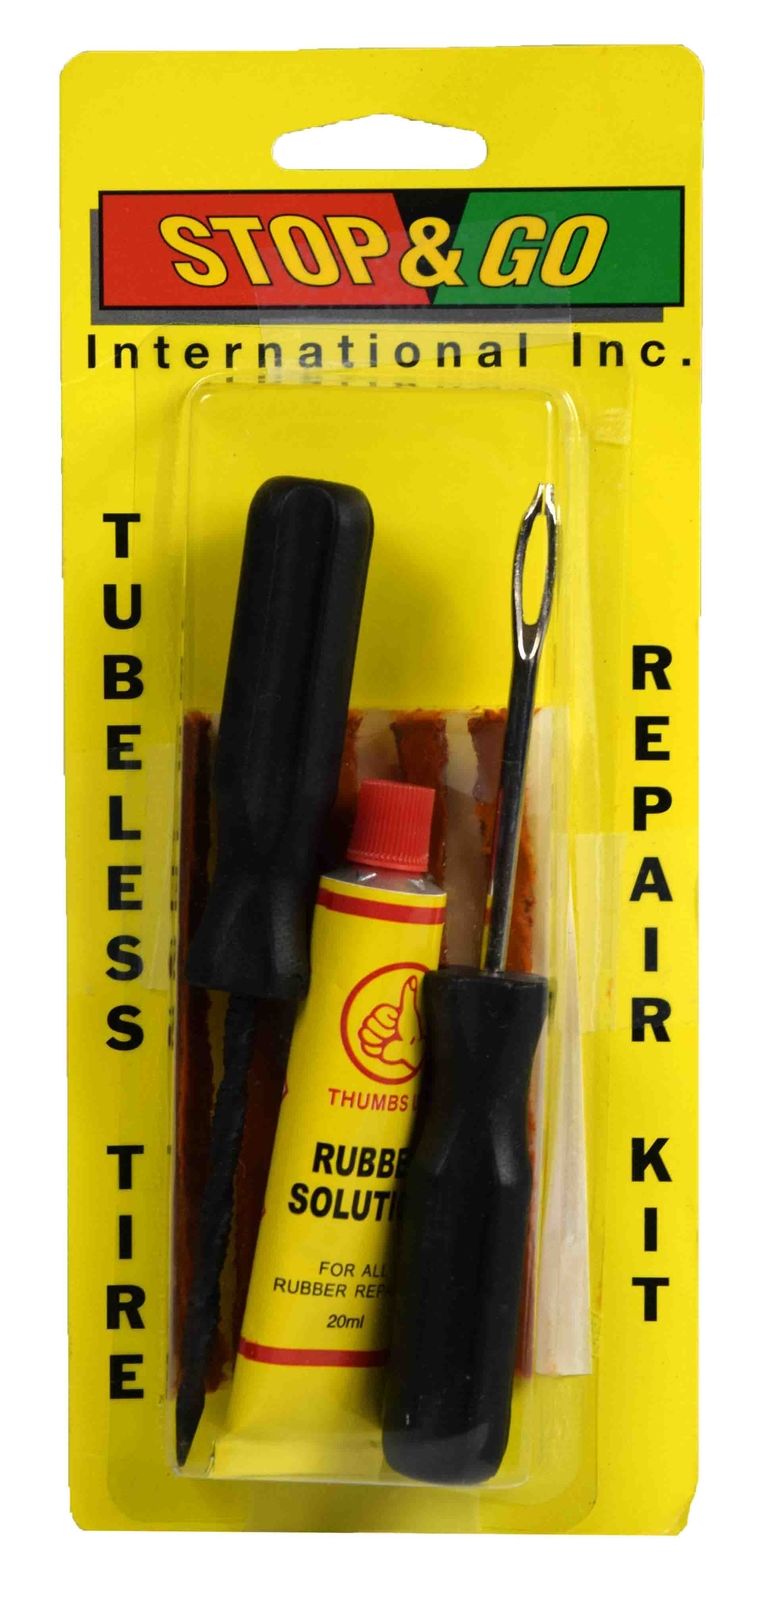 Stop-Go-76002-Tubeless-Tire-Repair-Kit-w-Rubber-Cement-image-1